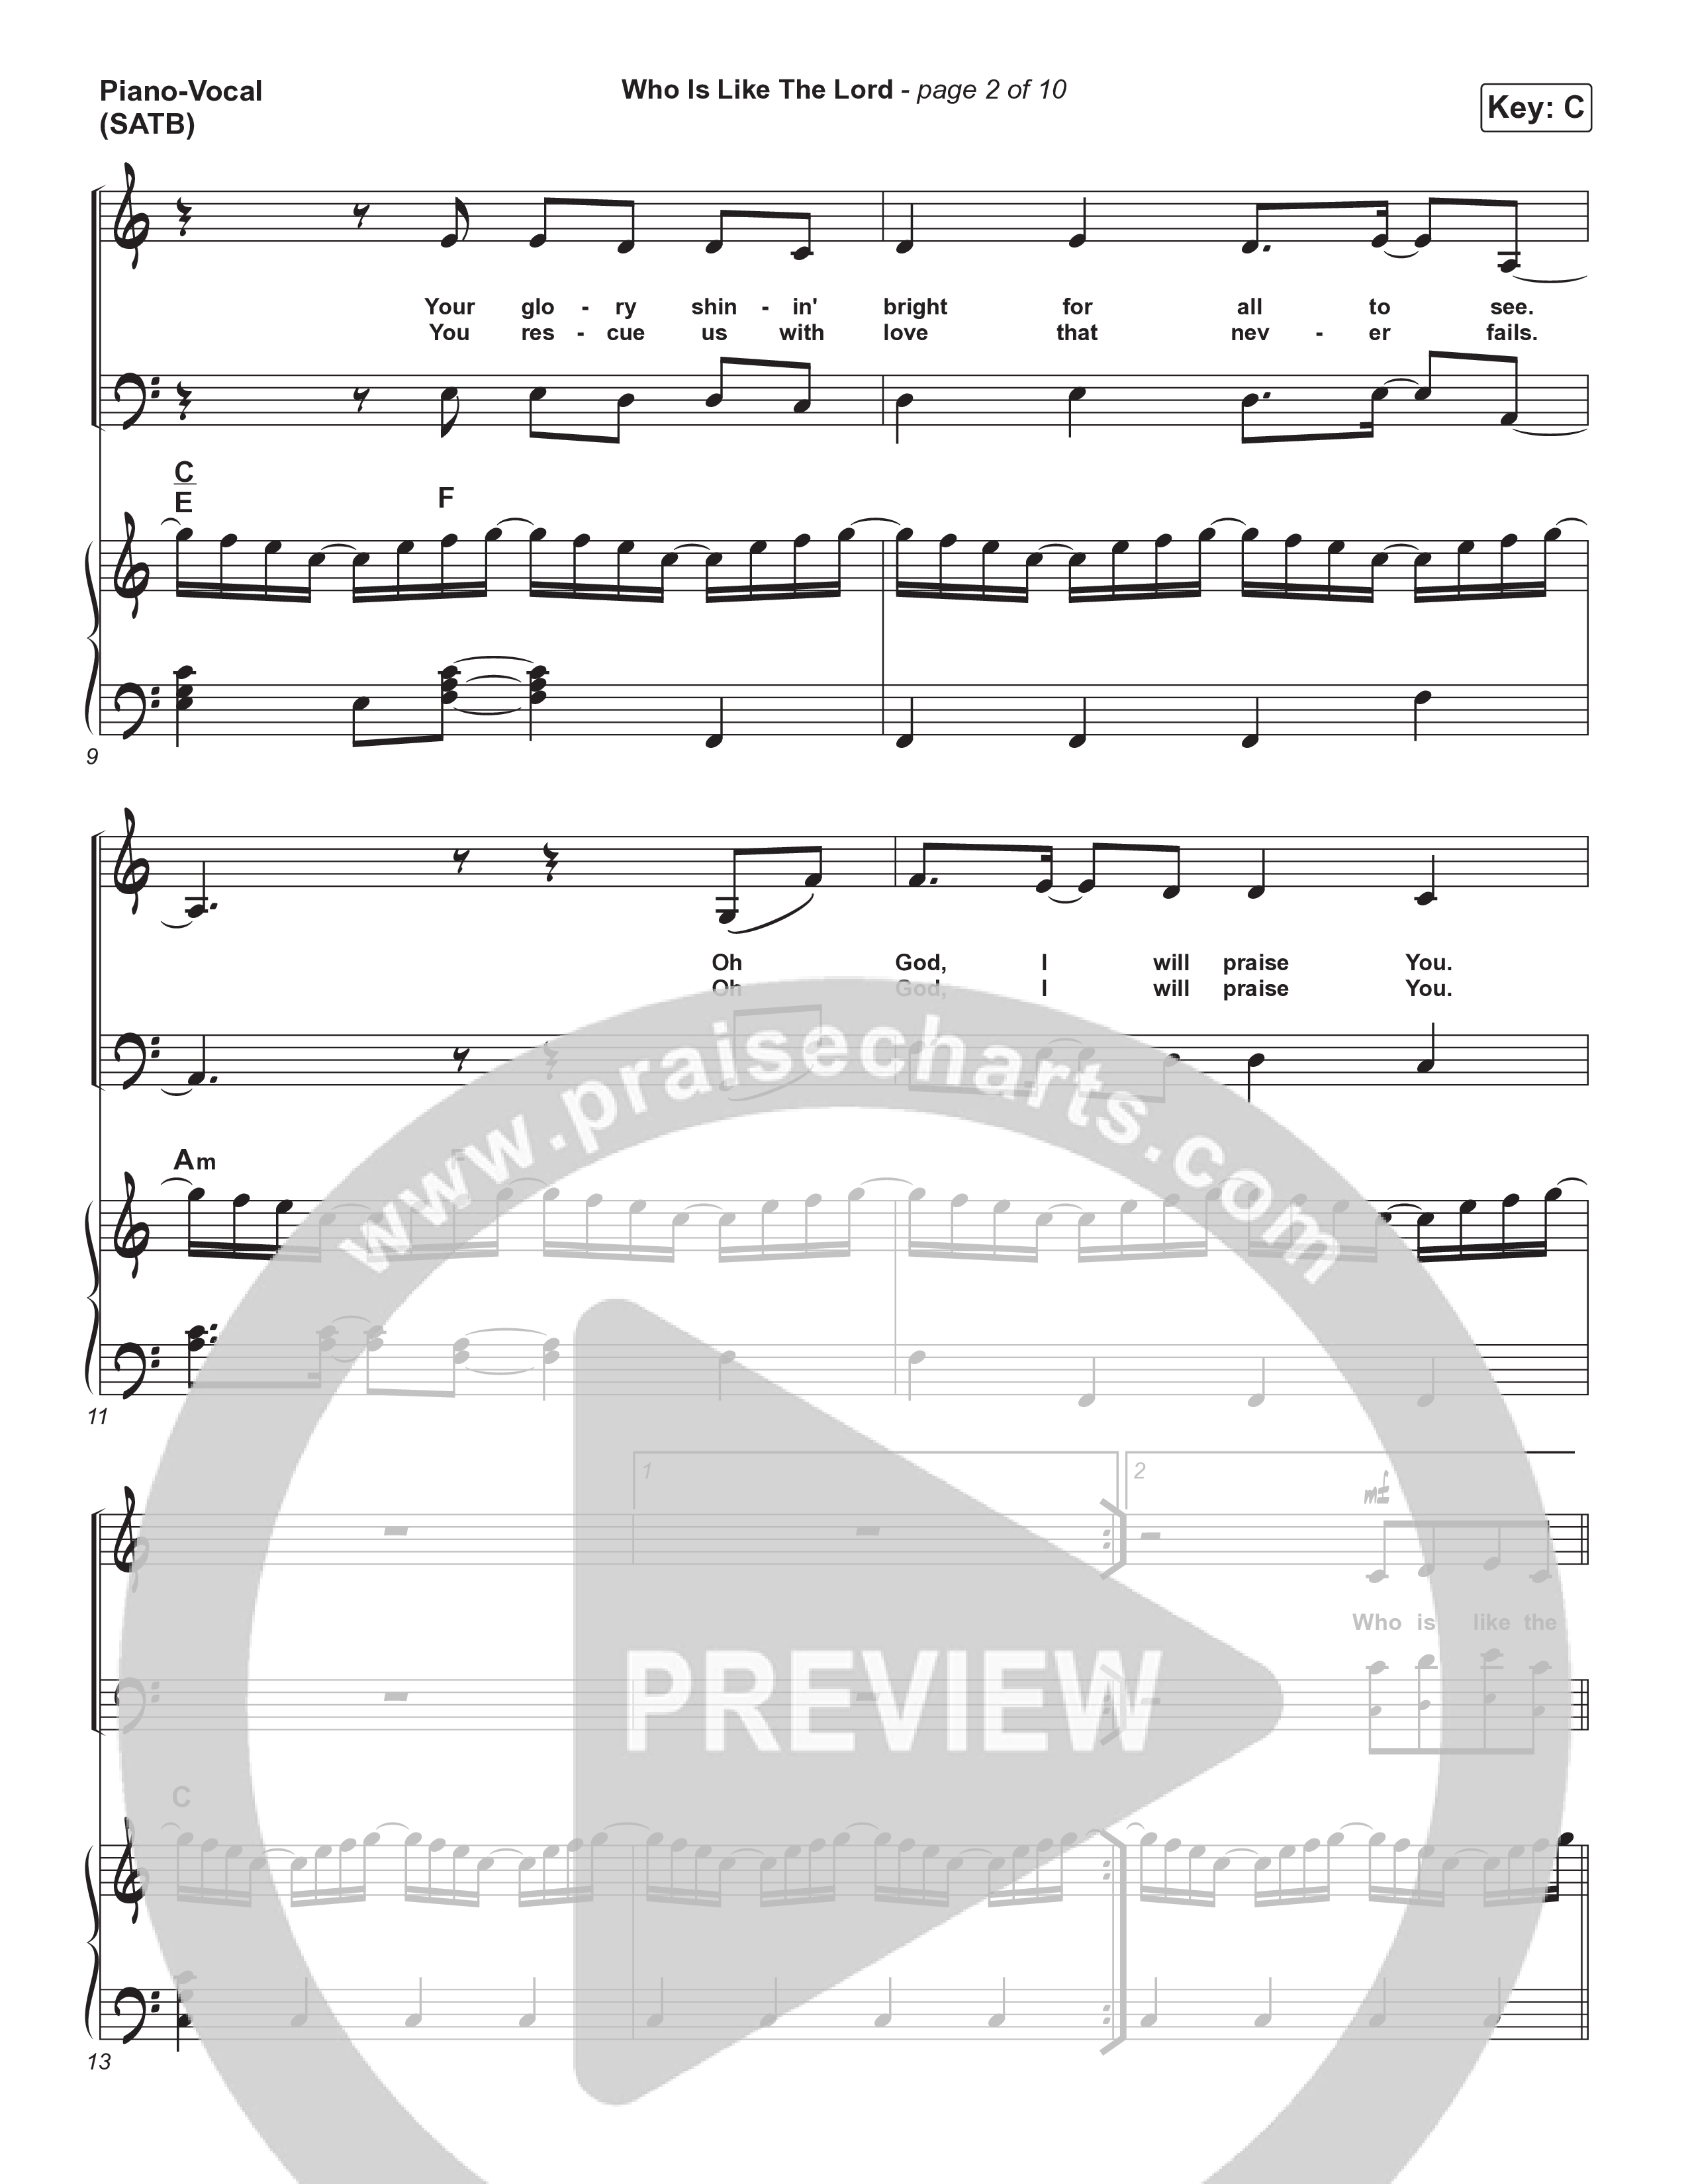 Who Is Like The Lord Piano/Vocal (SATB) (Highlands Worship)